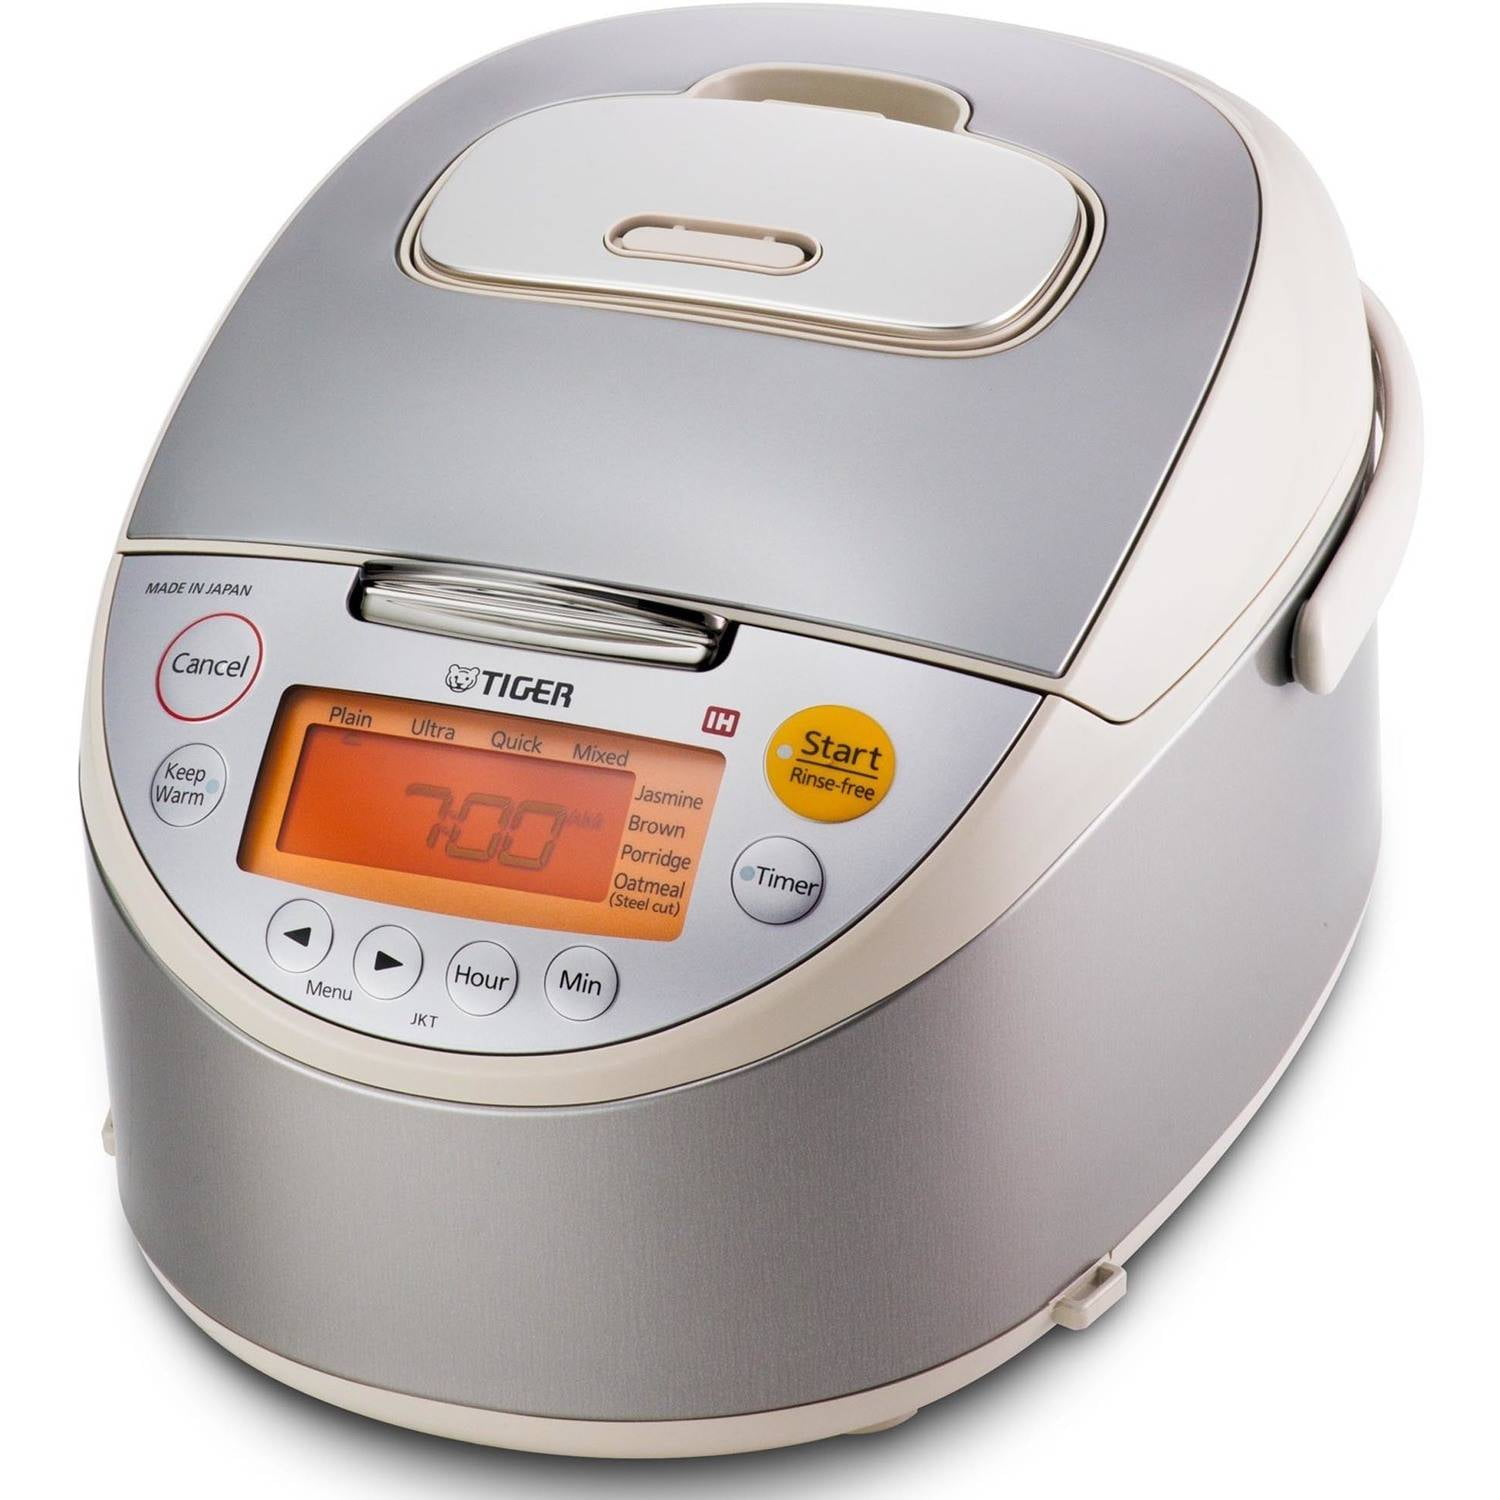 Tiger Stainless Steel Rice Cooker